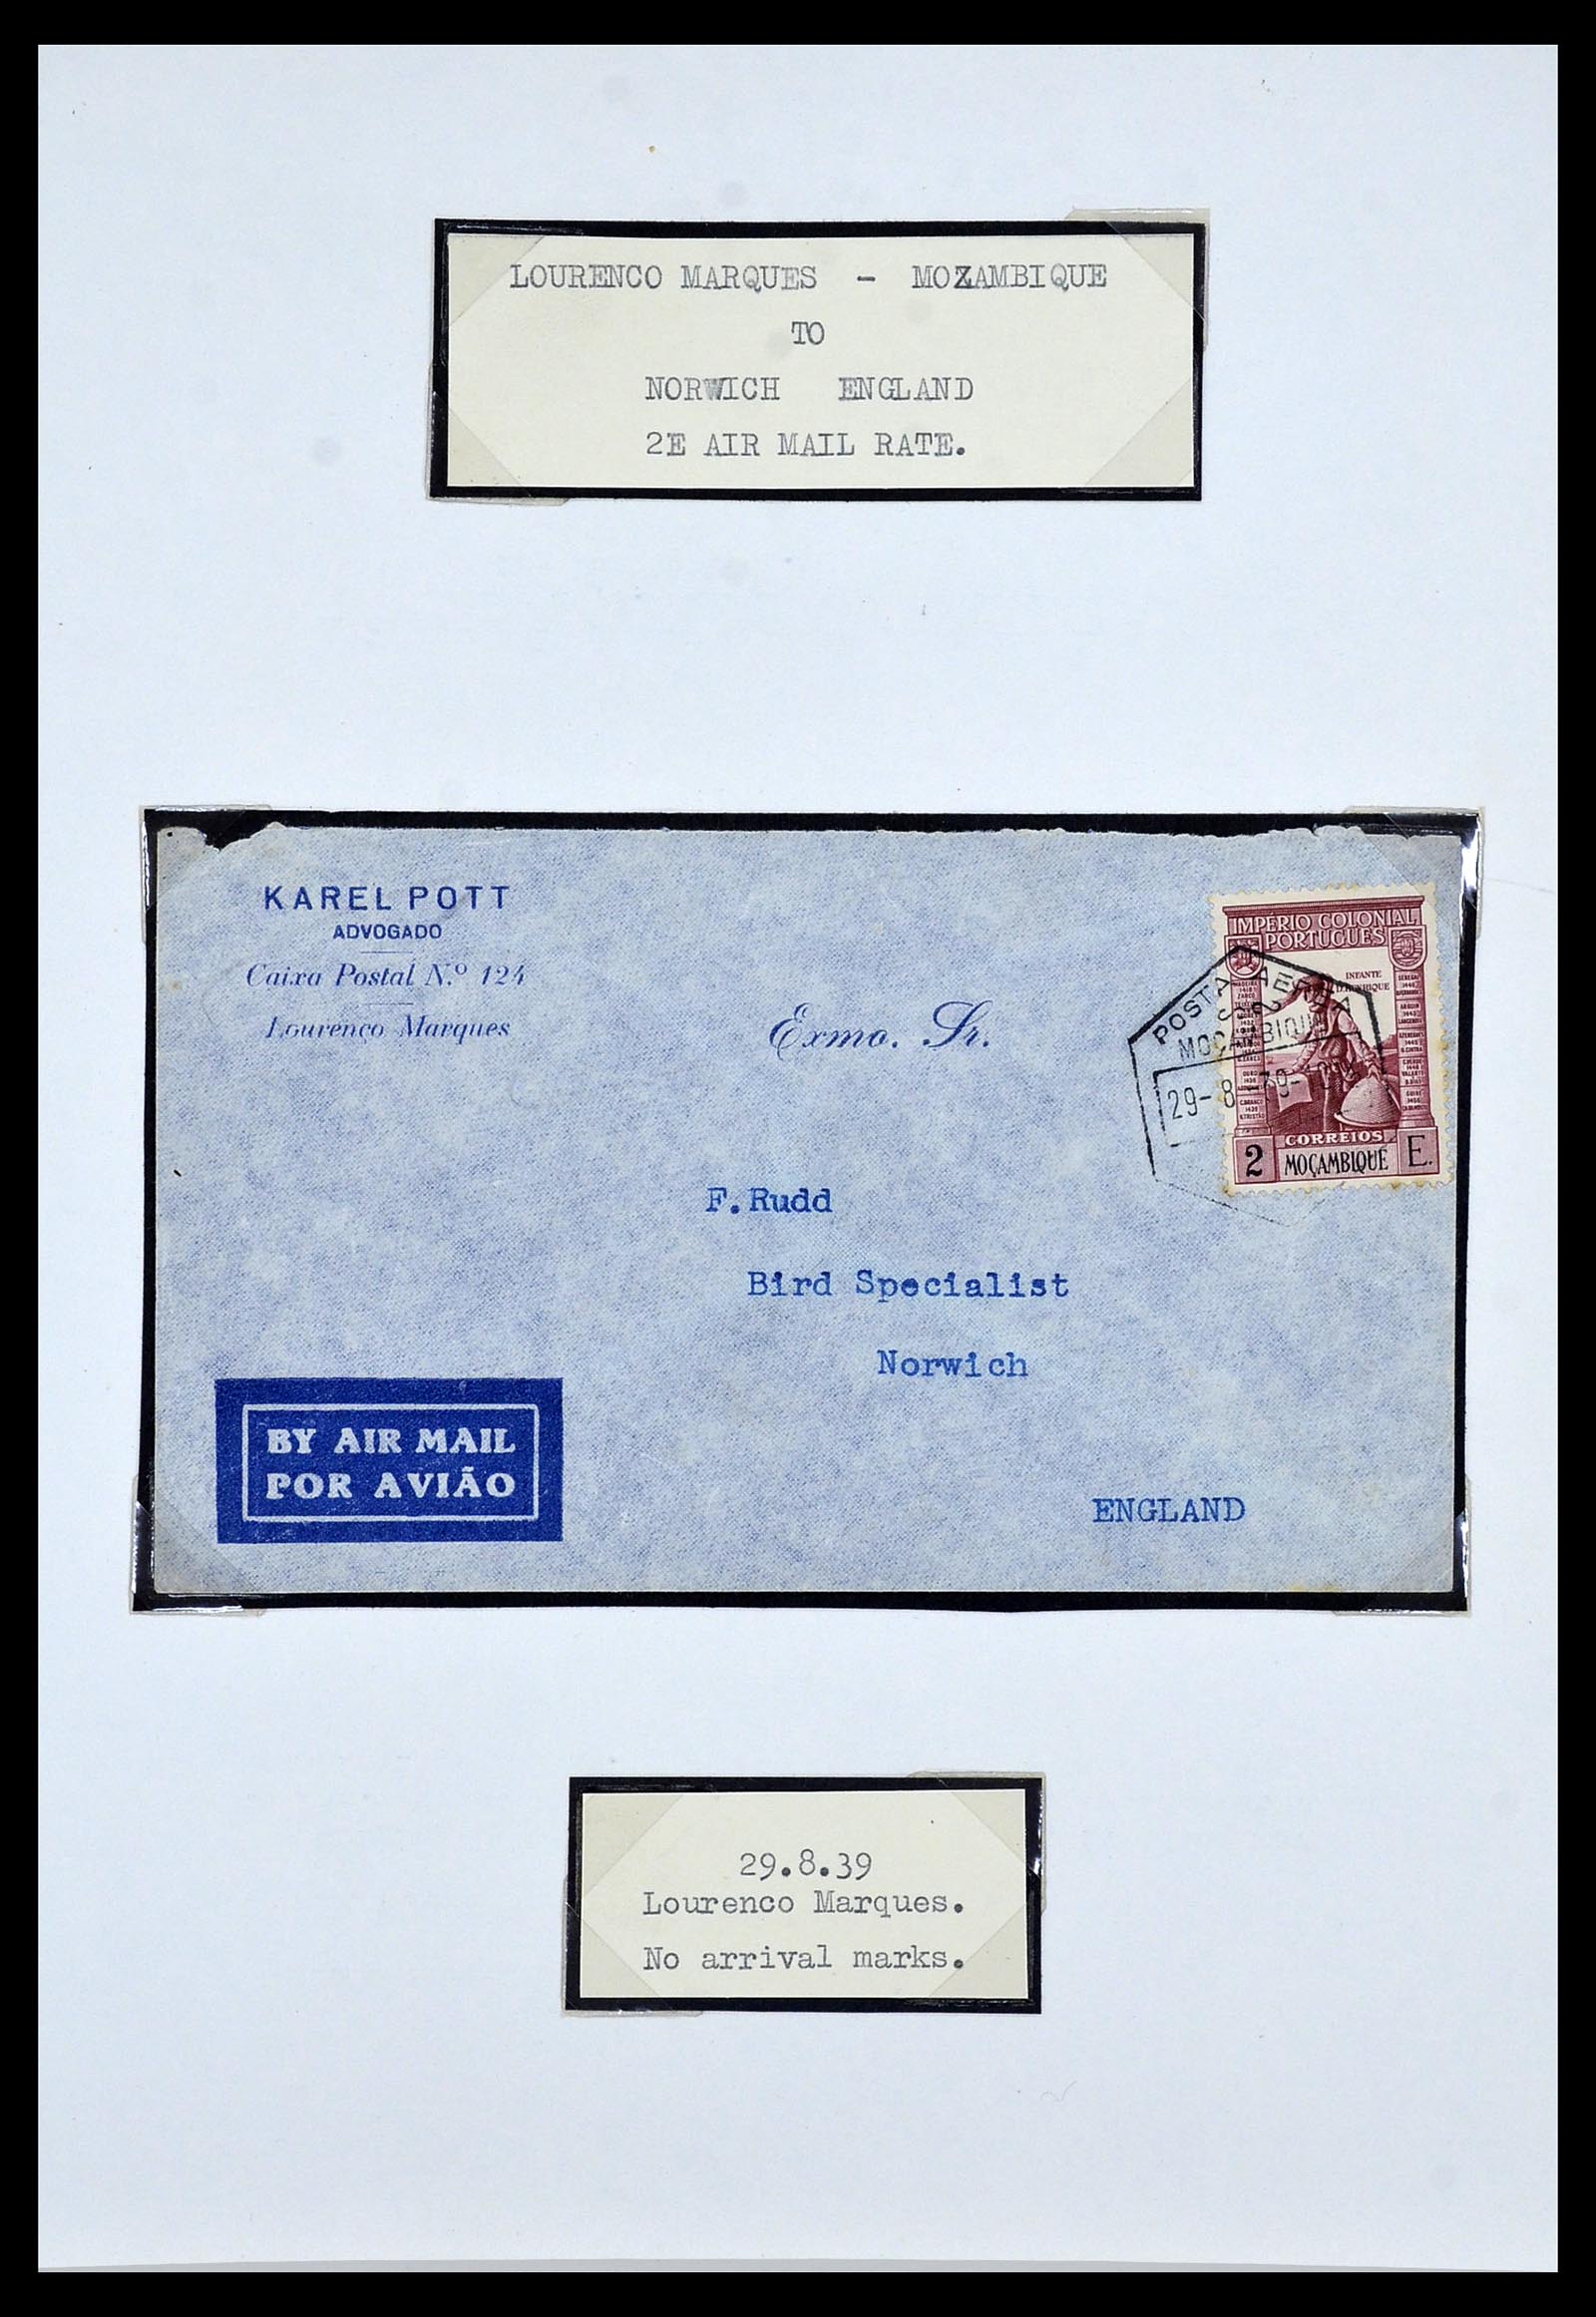 34212 020 - Stamp collection 34212 Portugal covers.